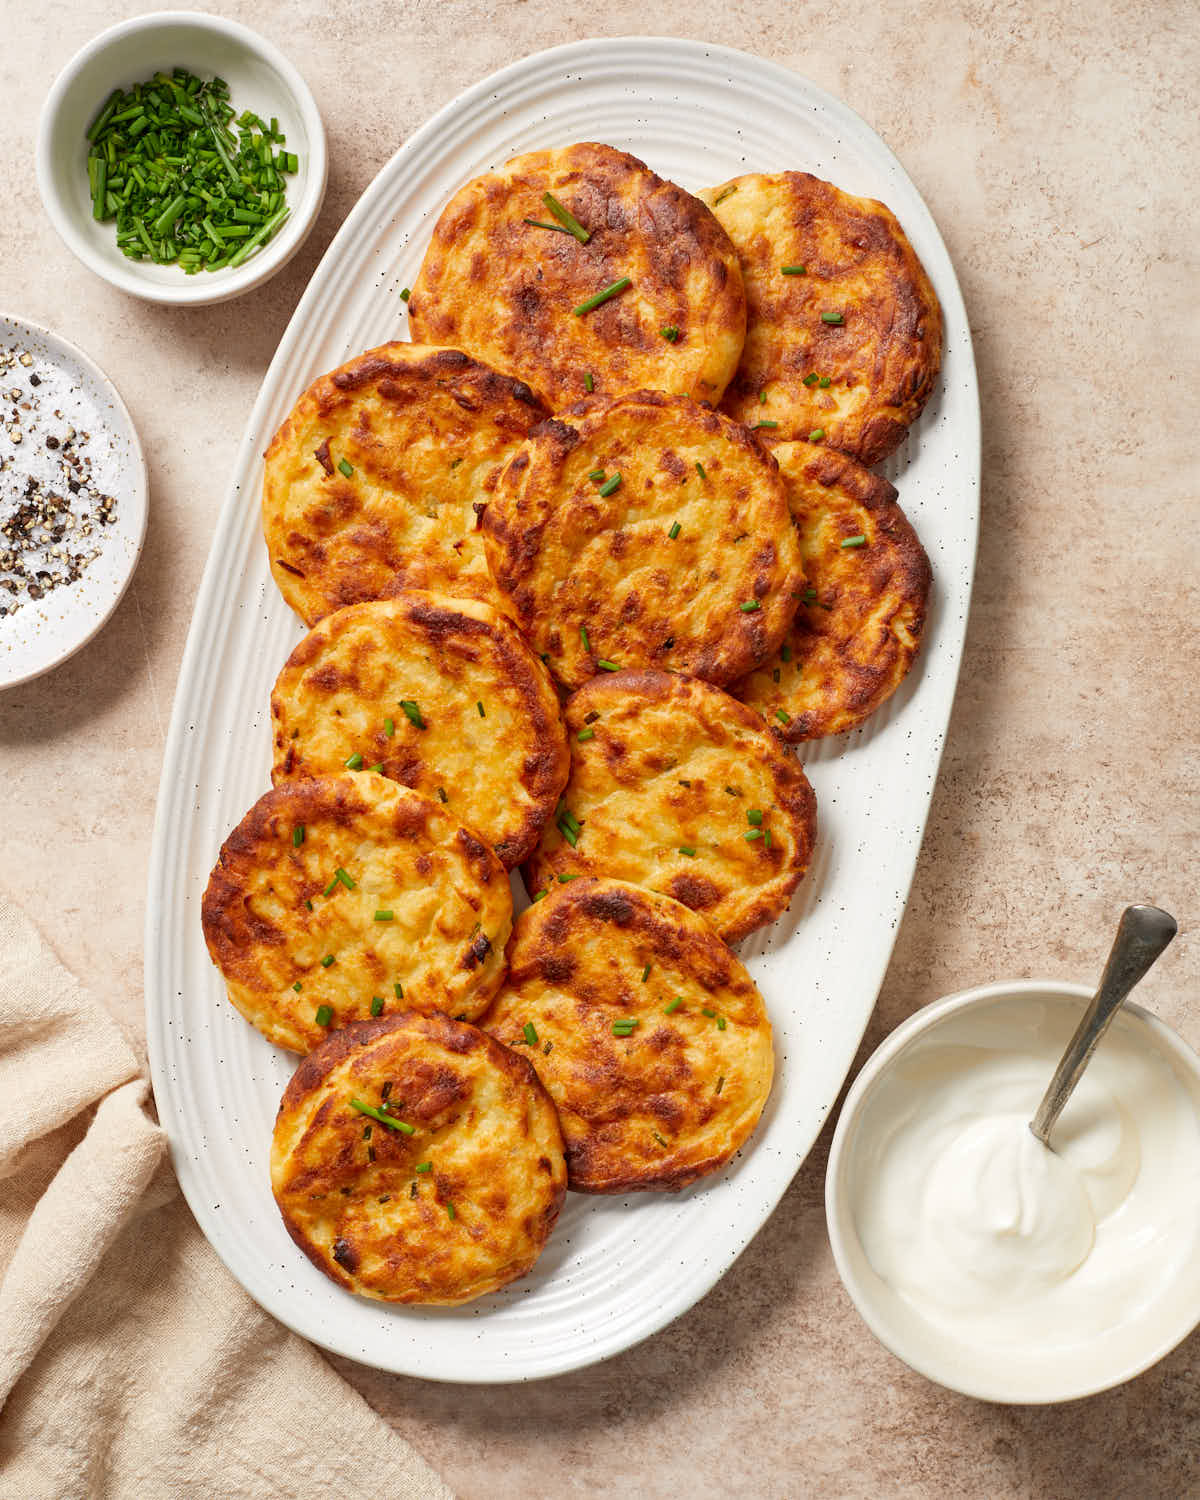 Golden brown and crispy potato cakes arranged on a white oval platter.